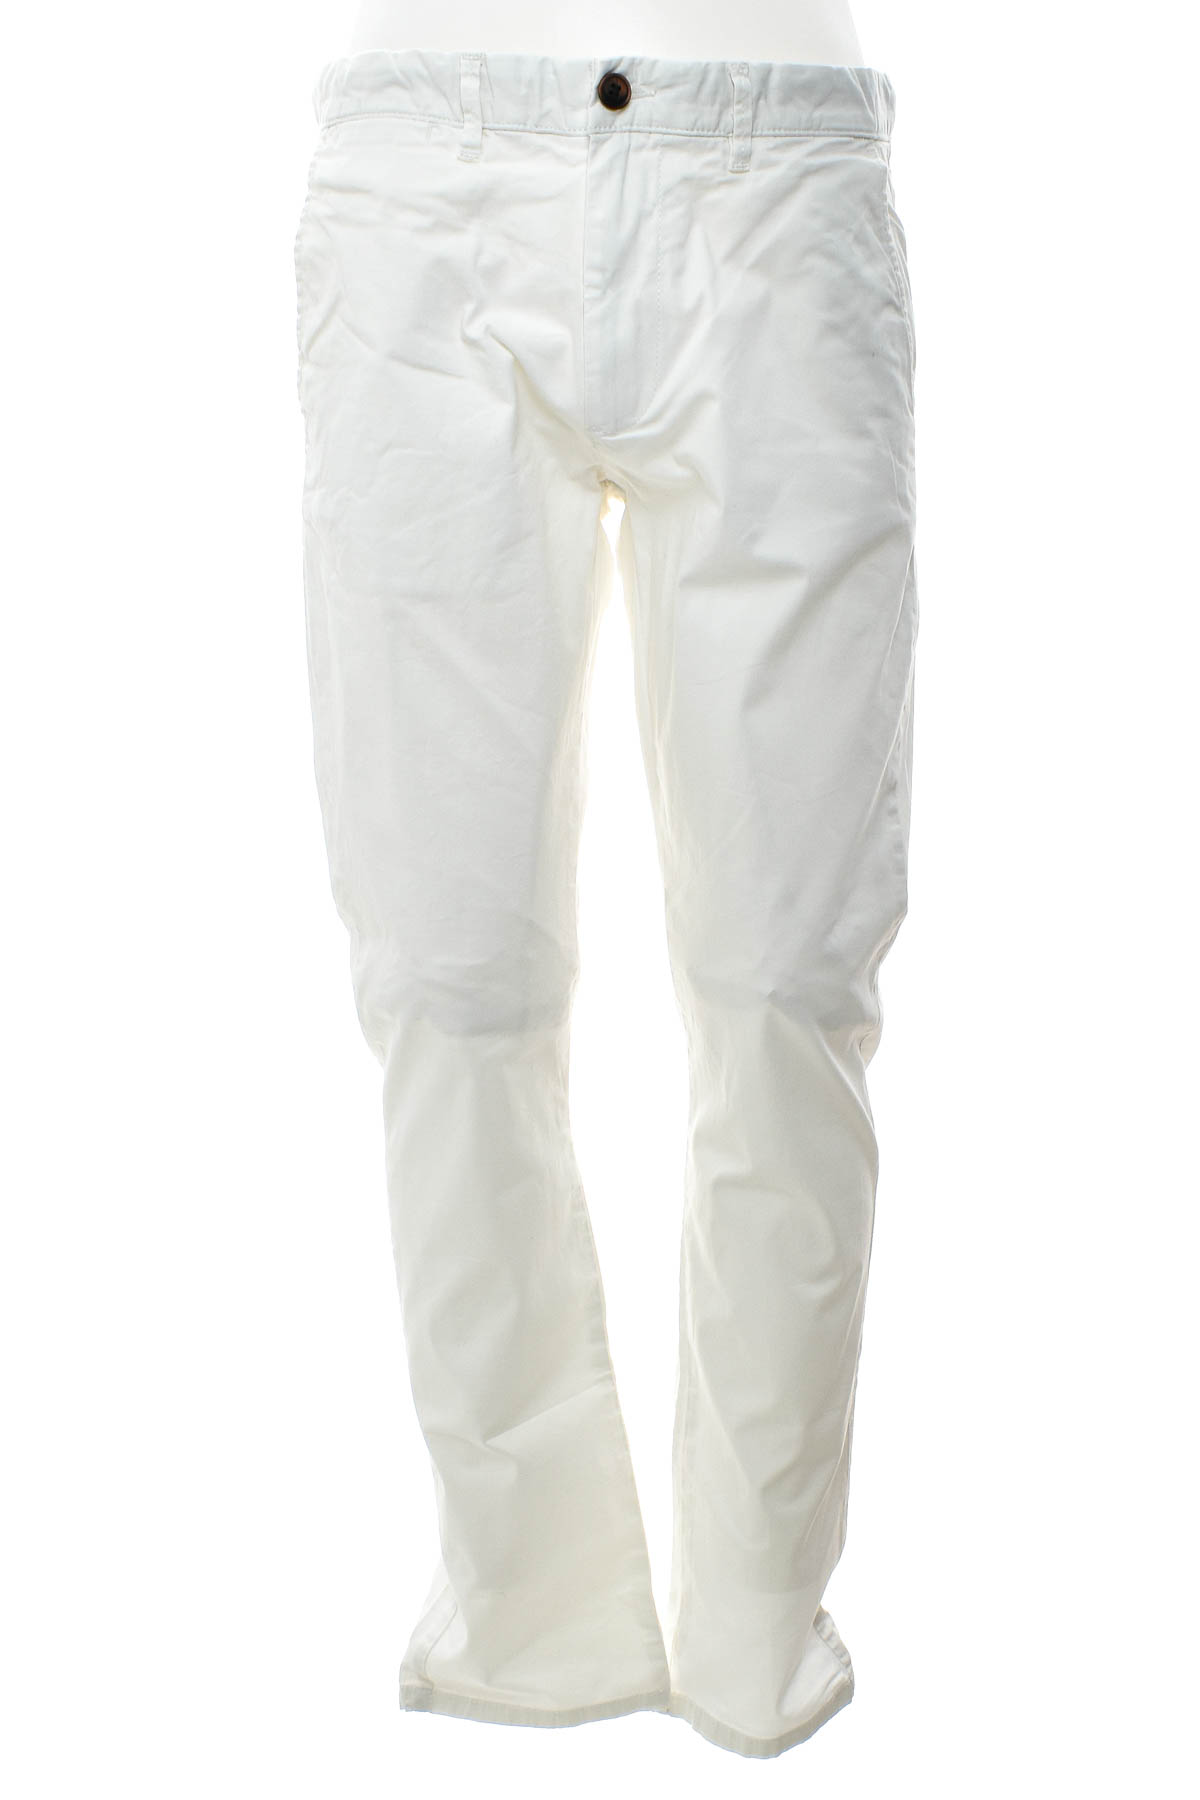 Men's trousers - SELECTED / HOMME - 0